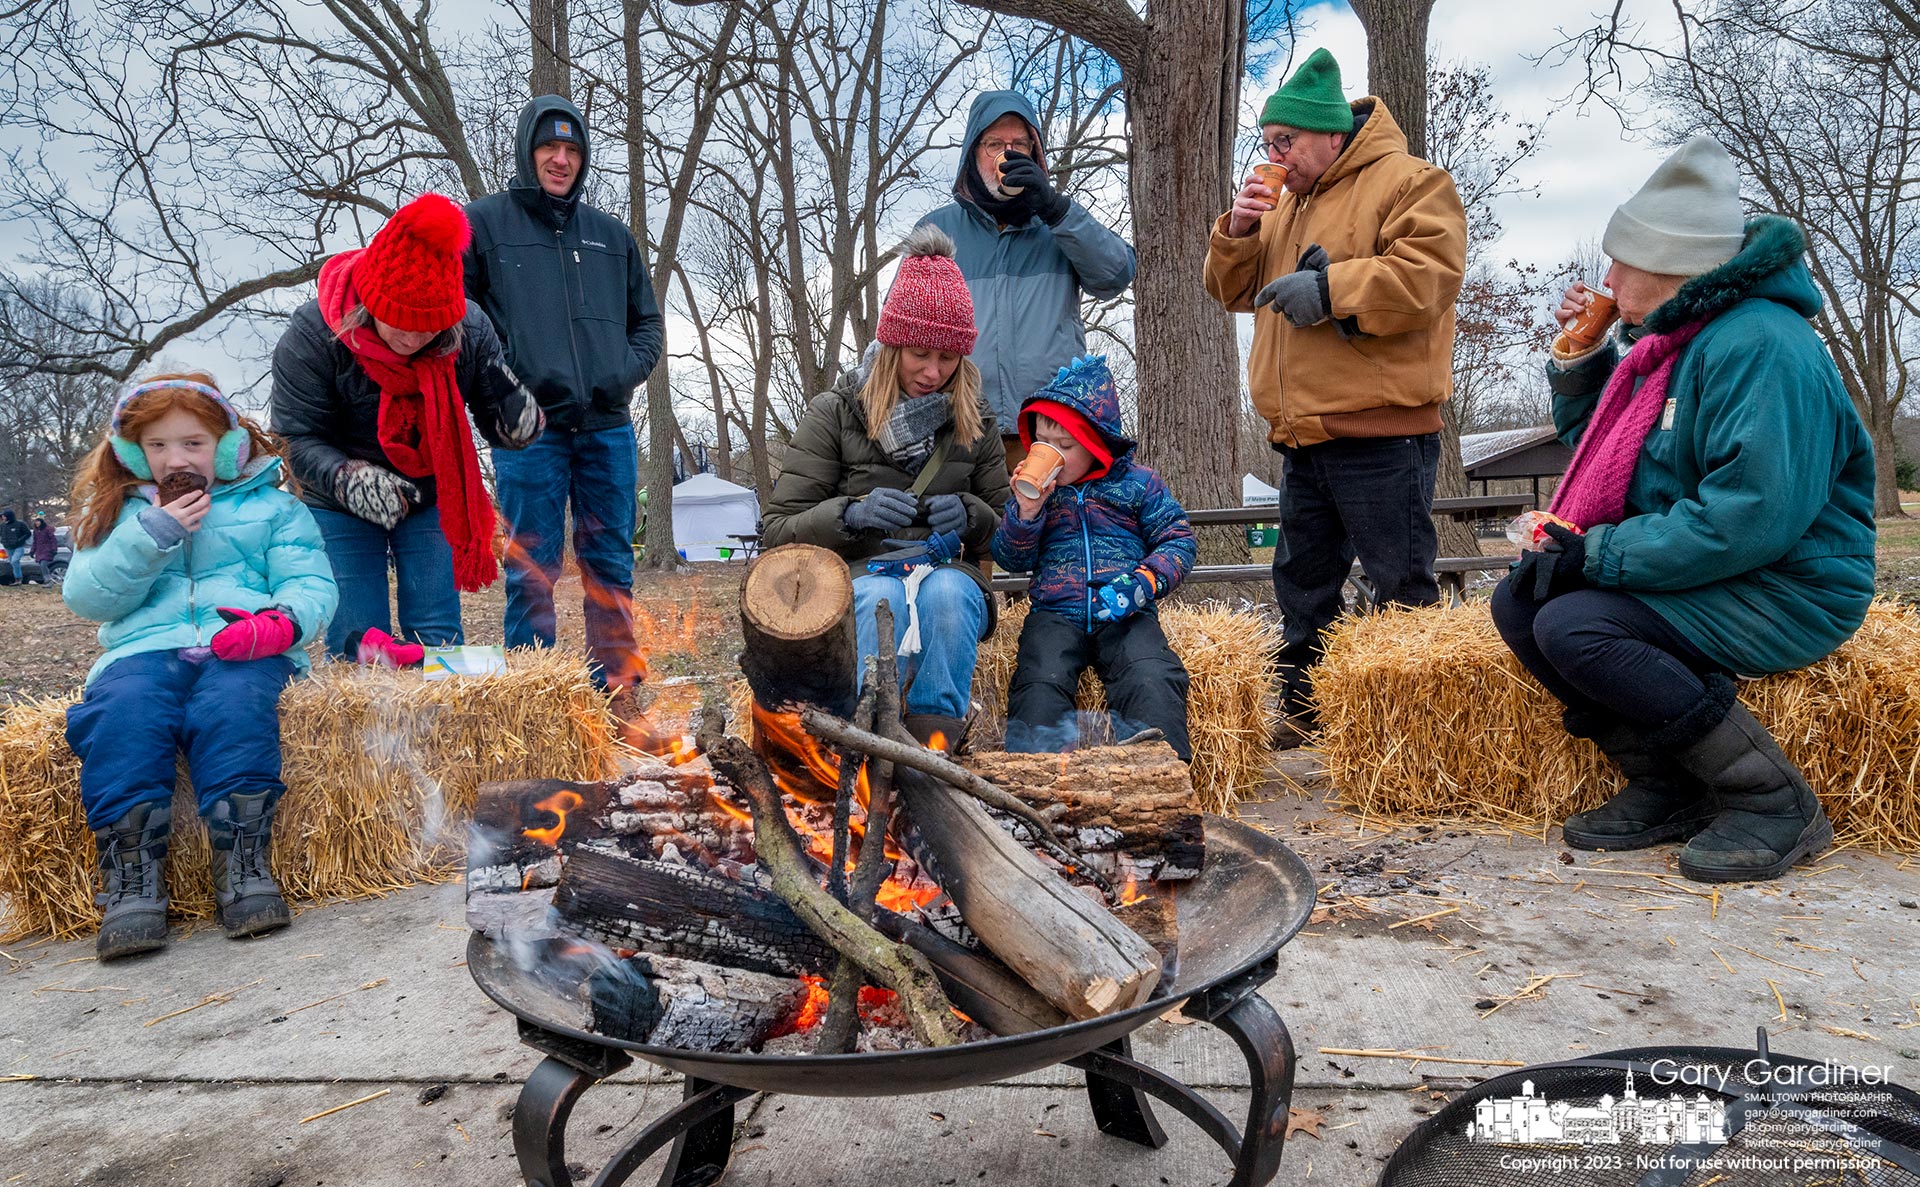 Families gather around a fire and drink hot chocolate after finishing the Winter Hike in Sharon Woods Metro Park Saturday. My Final Photo for January 14, 2023.